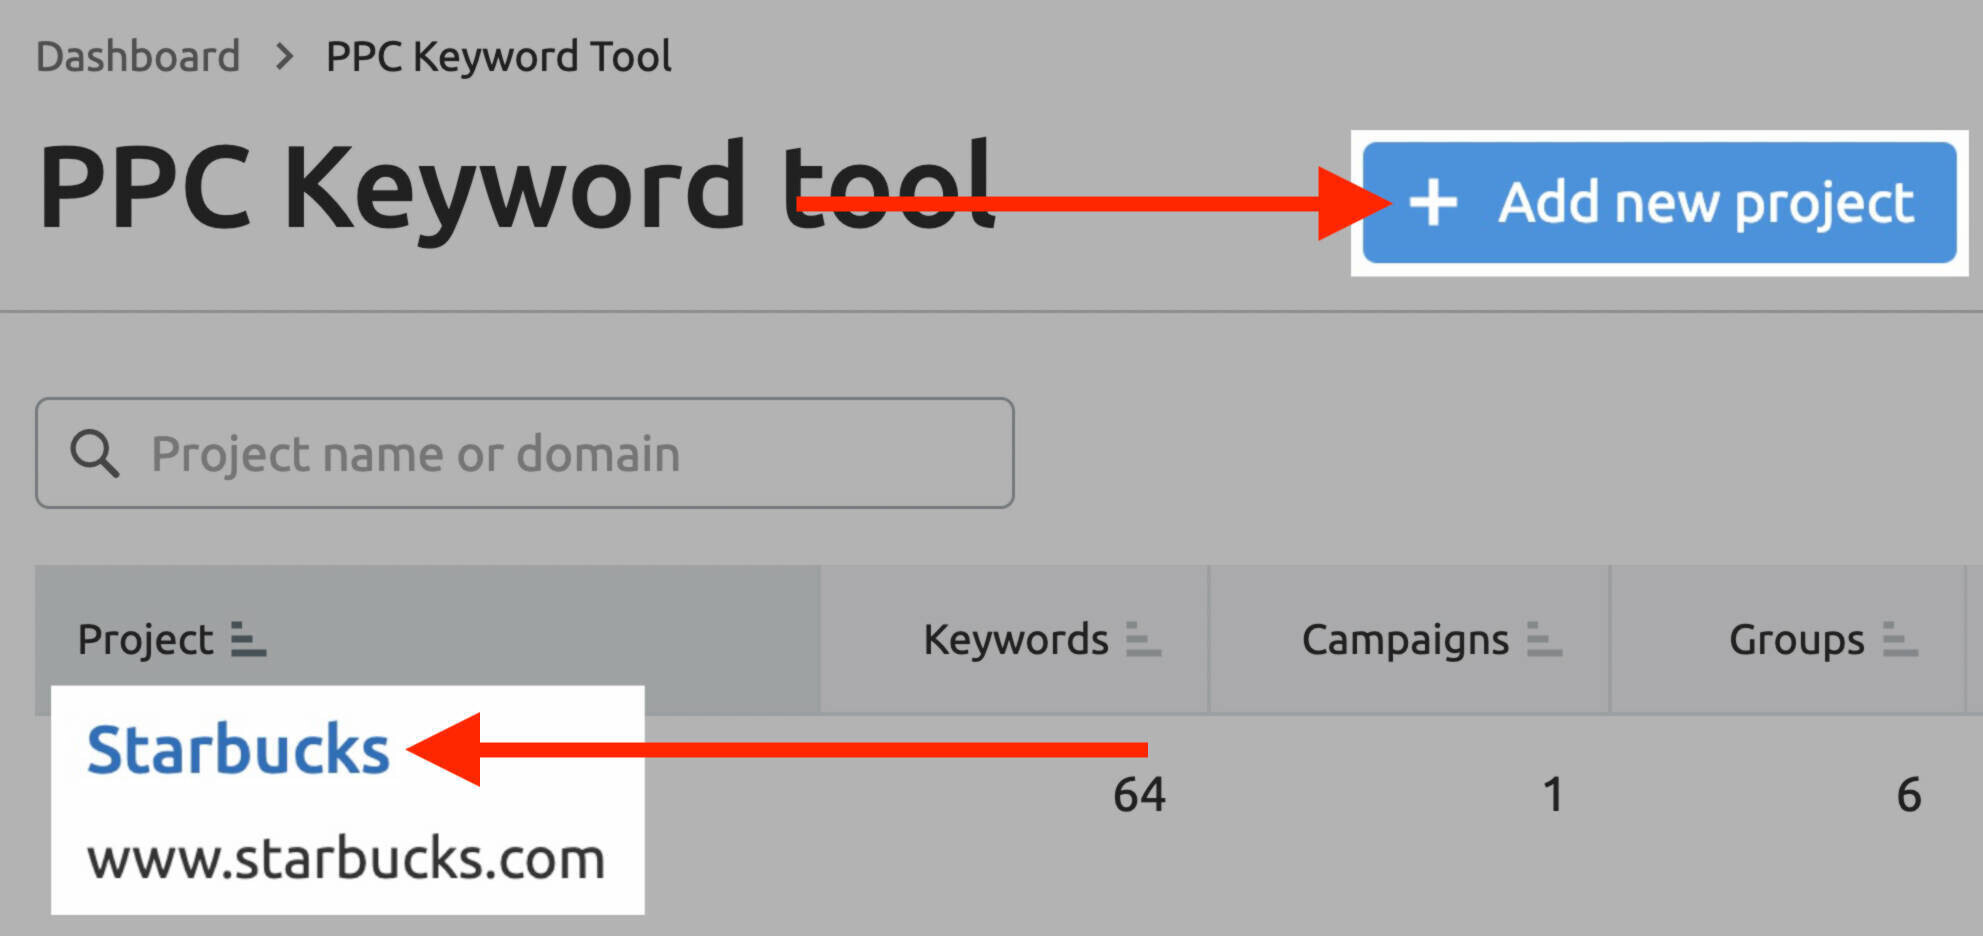 PPC Keyword Tool projects